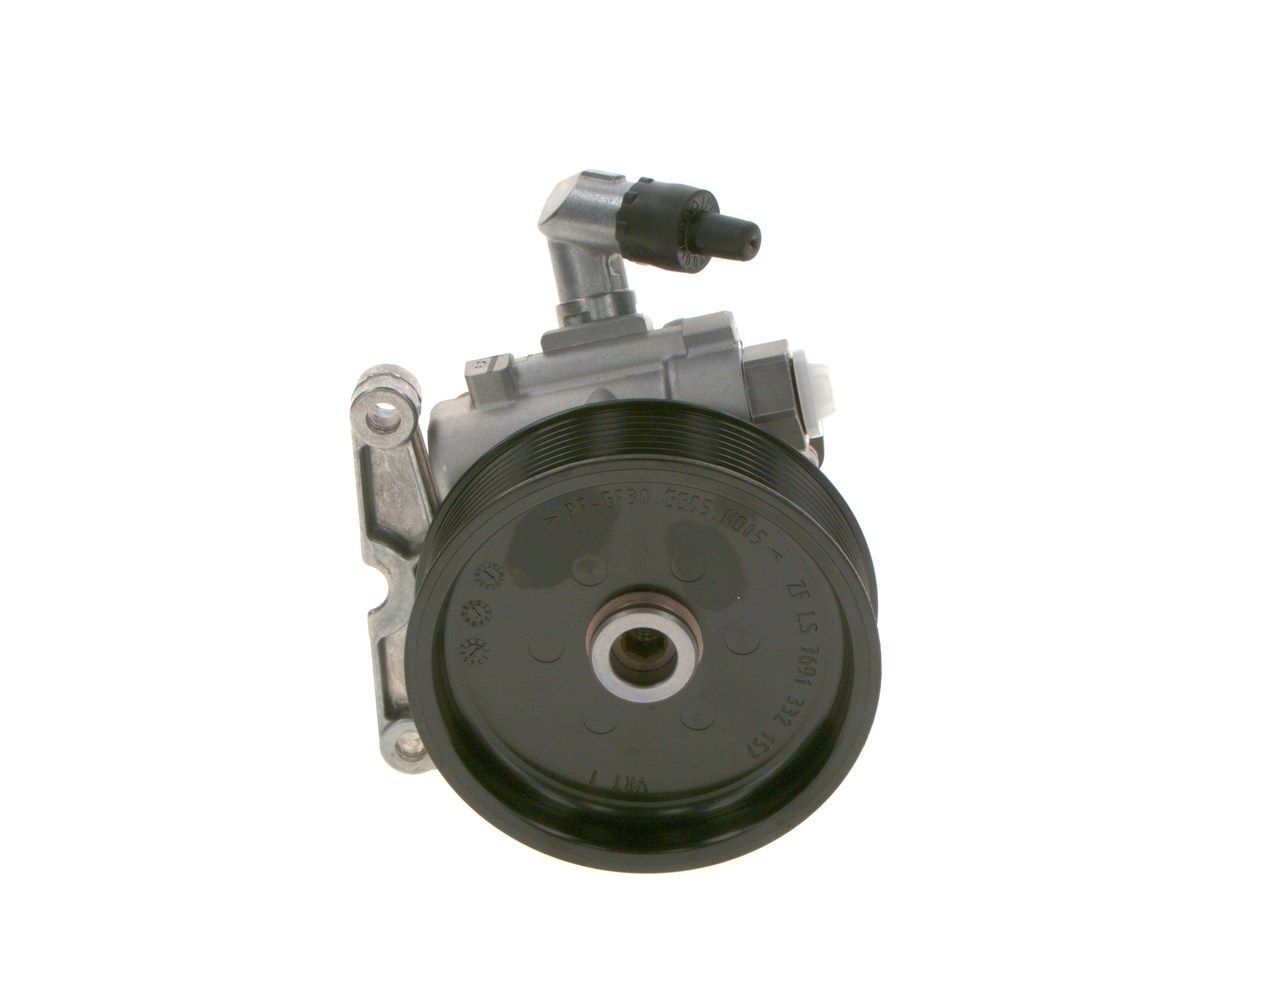 BOSCH Hydraulic steering pump K S01 000 674 suitable for MERCEDES-BENZ ML-Class, GL